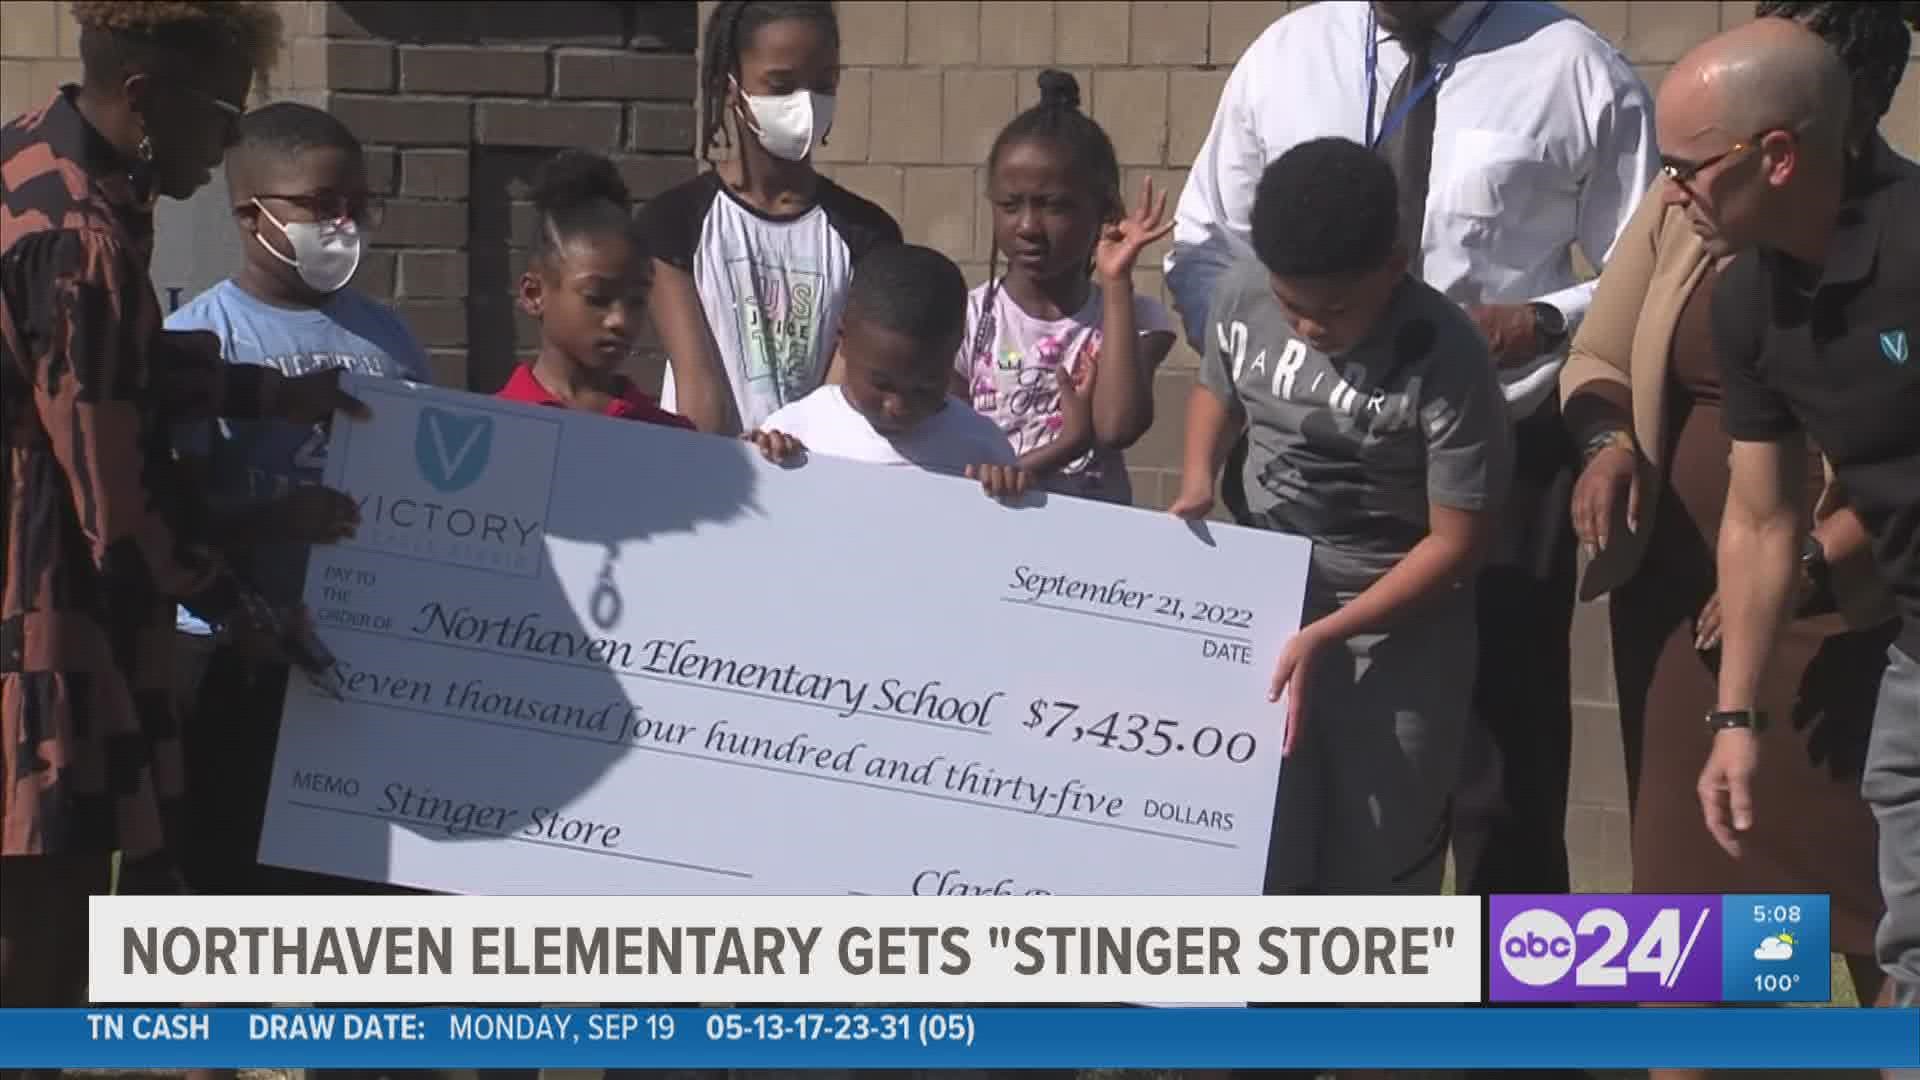 The "Stinger Store" is part of behavior, discipline, and attendance incentives at school. Students can earn Stinger Bucks to purchase items from the store.